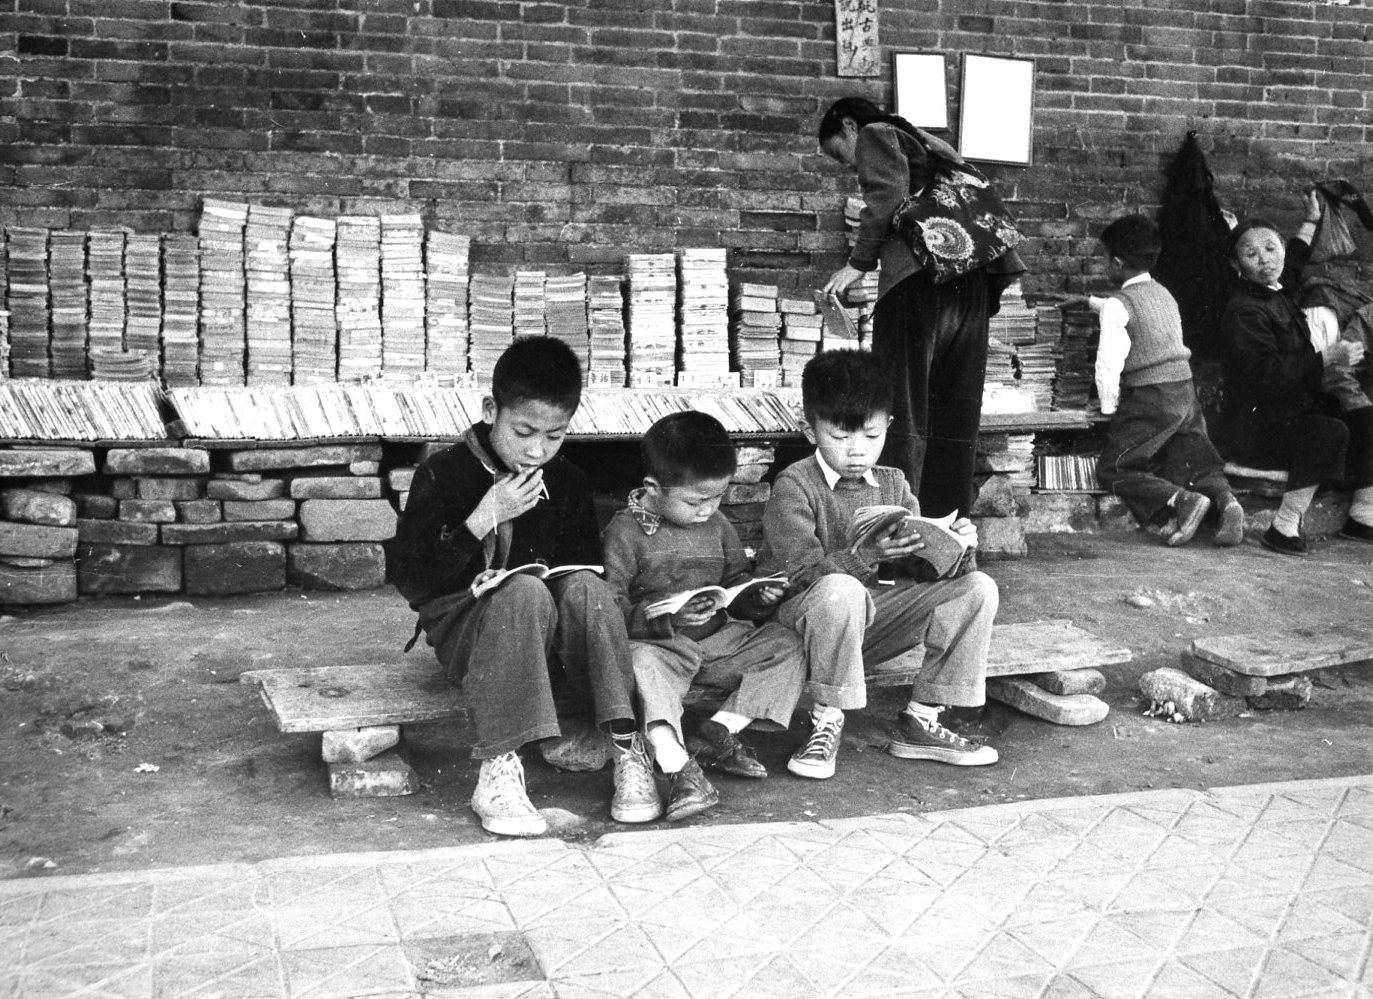 dominique darbois pekin 1957 1 photography of china - Dominique Darbois | Black and white | Guest Post | Children | Hundred Flowers - Dominique Darbois